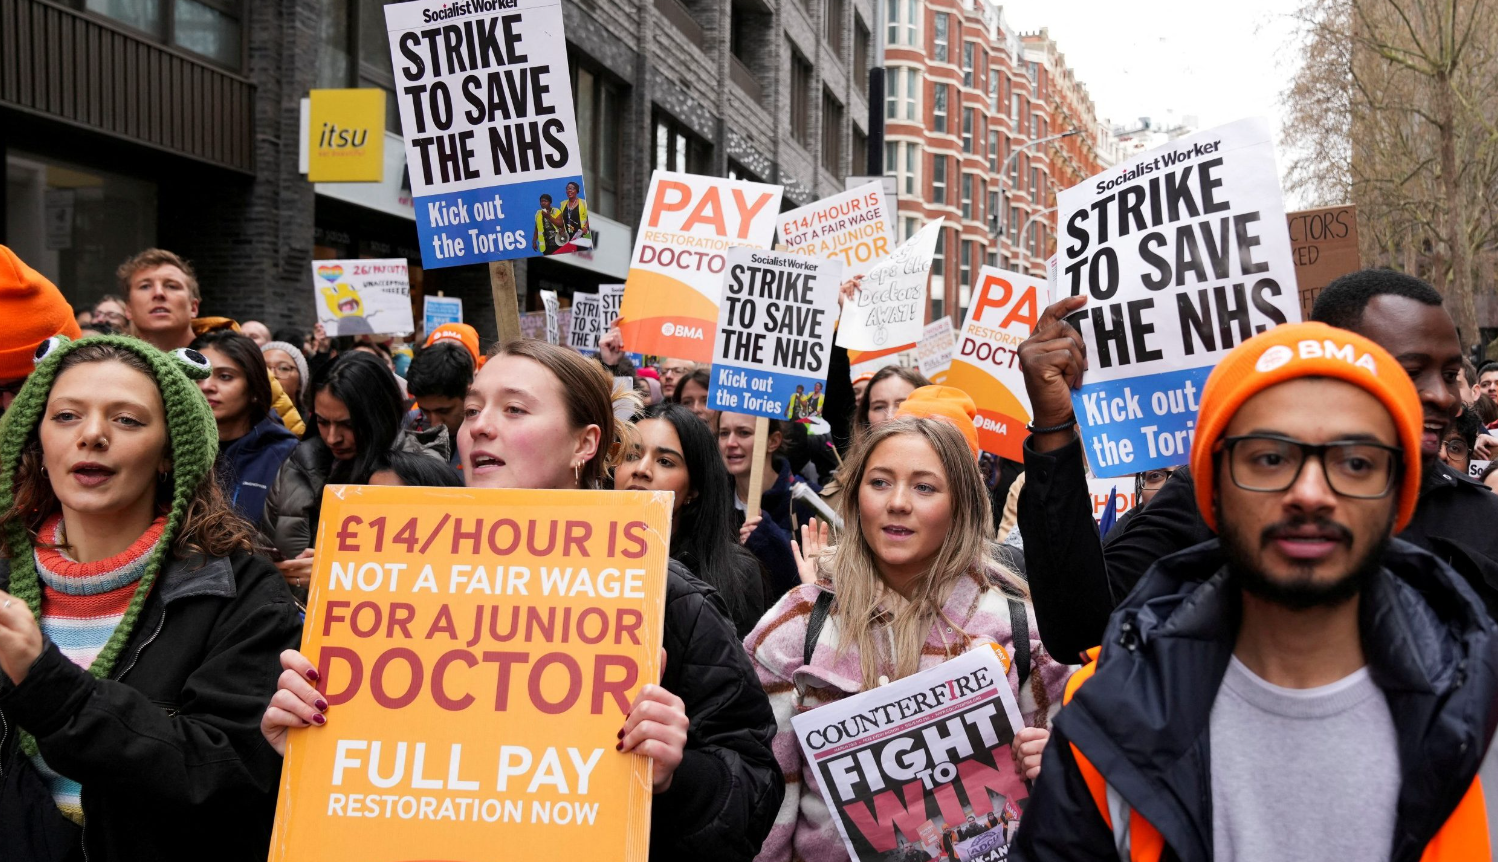 BMA 'working group' exploring more radical GP industrial action